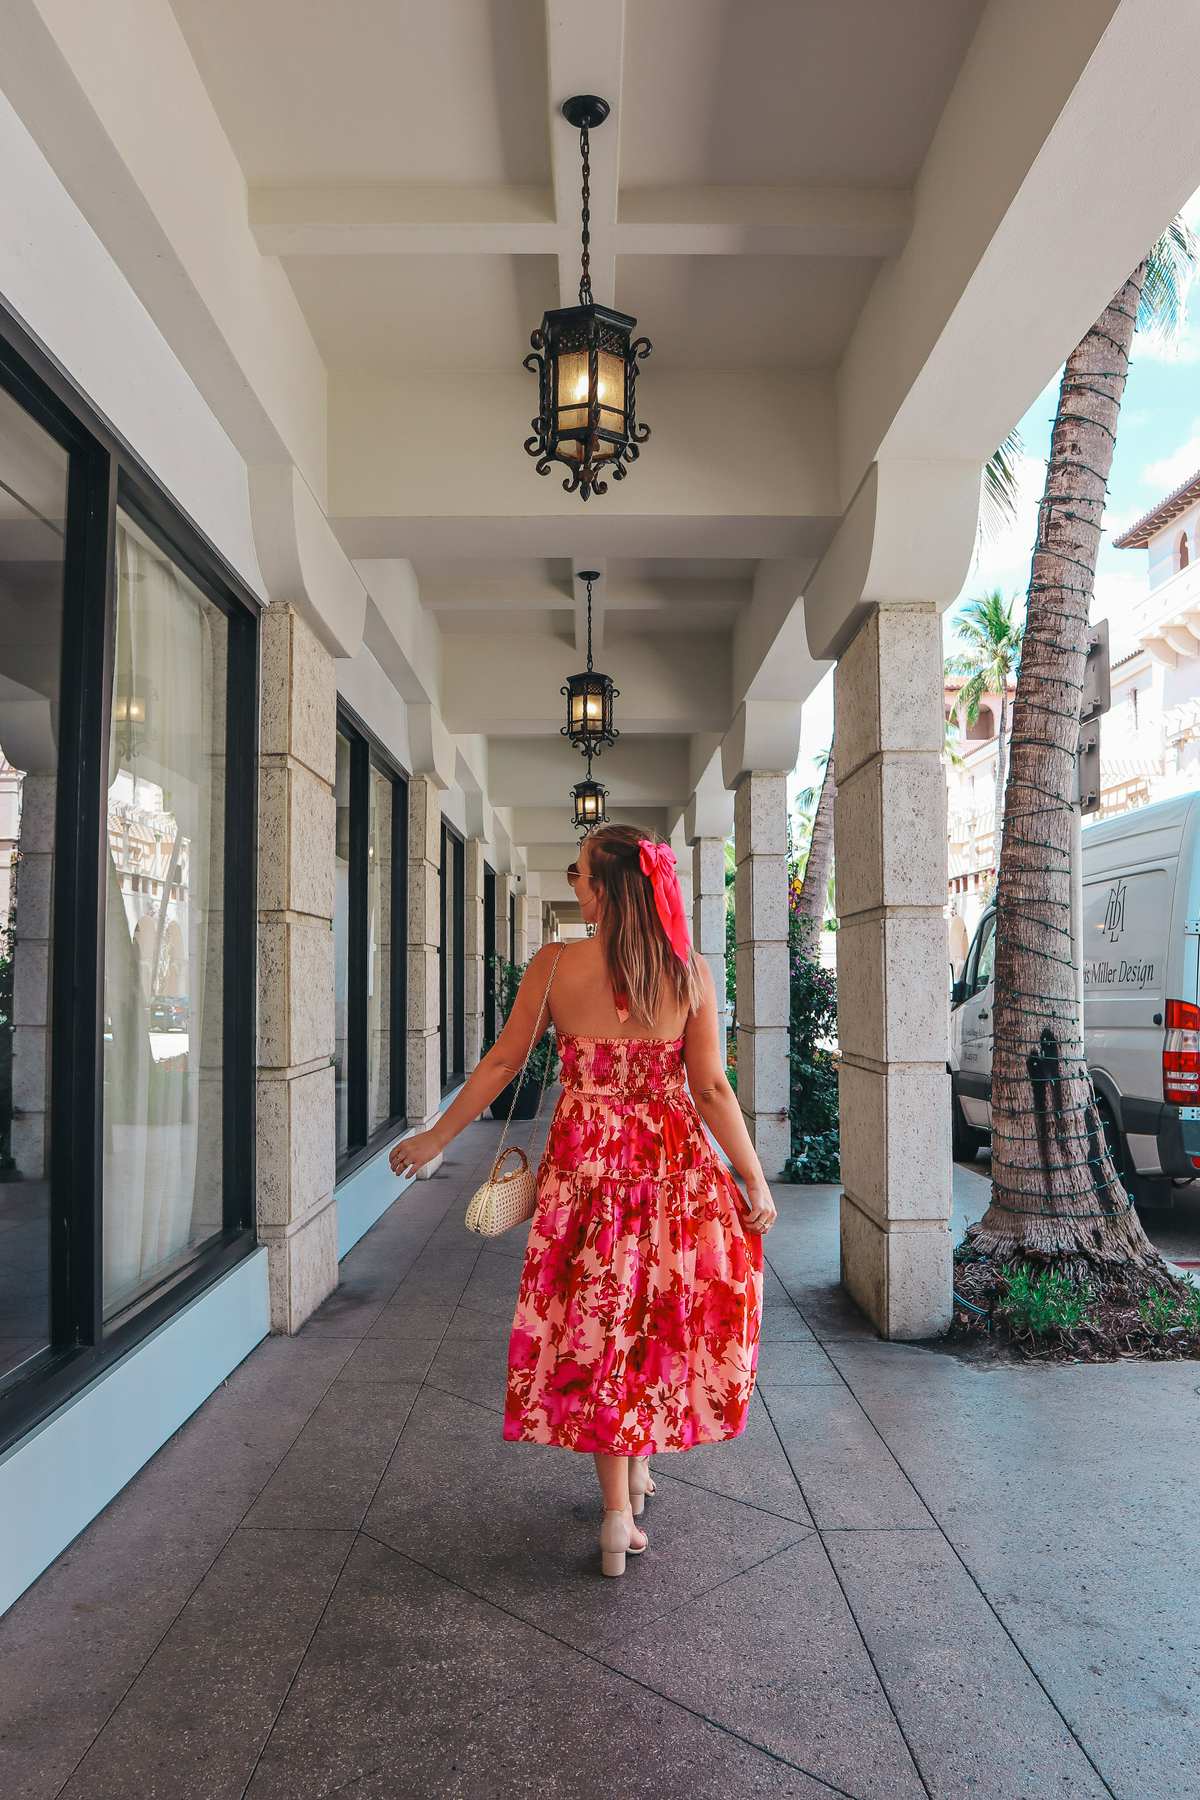 Strolling the shops at Worth Ave in Palm Beach